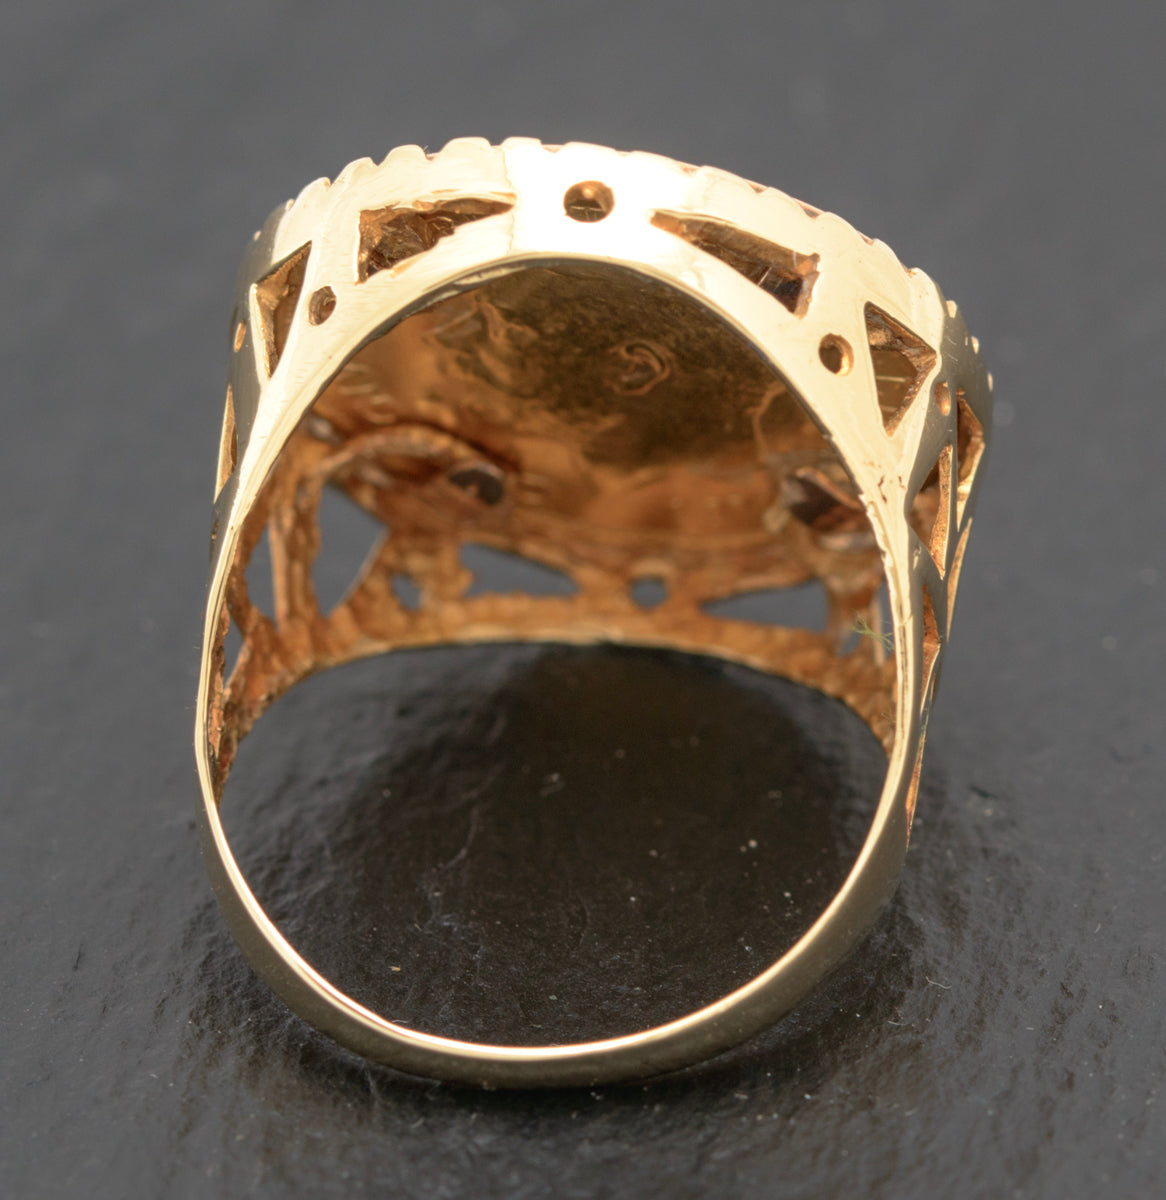 Antique 22ct Gold Half Sovereign Coin In 9ct Gold Ring Mount H'mark 1979 (A1655)